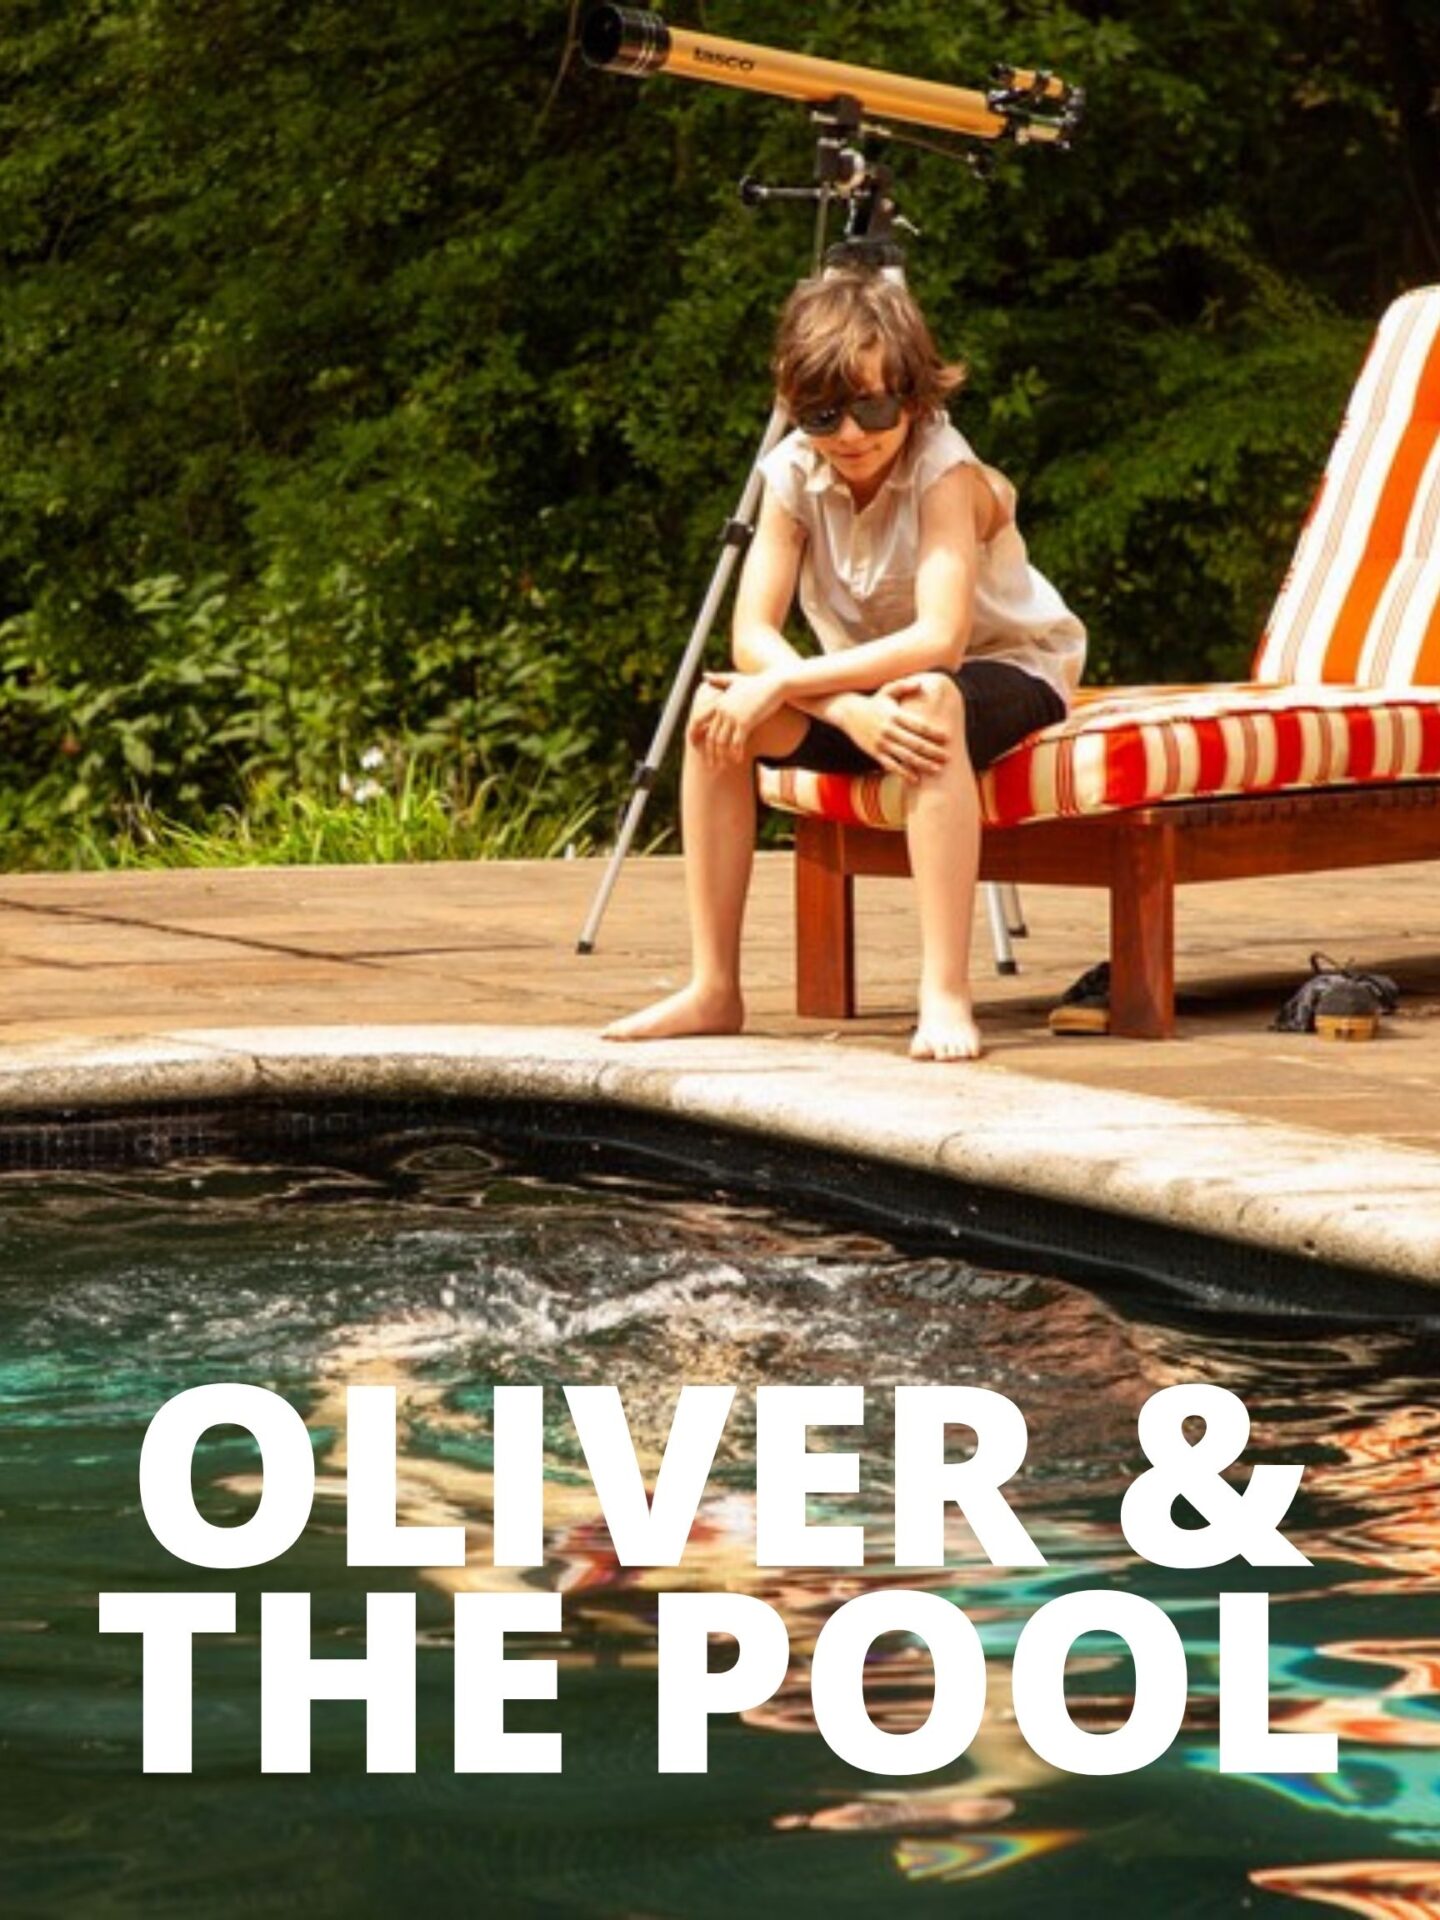 Oliver & the Pool